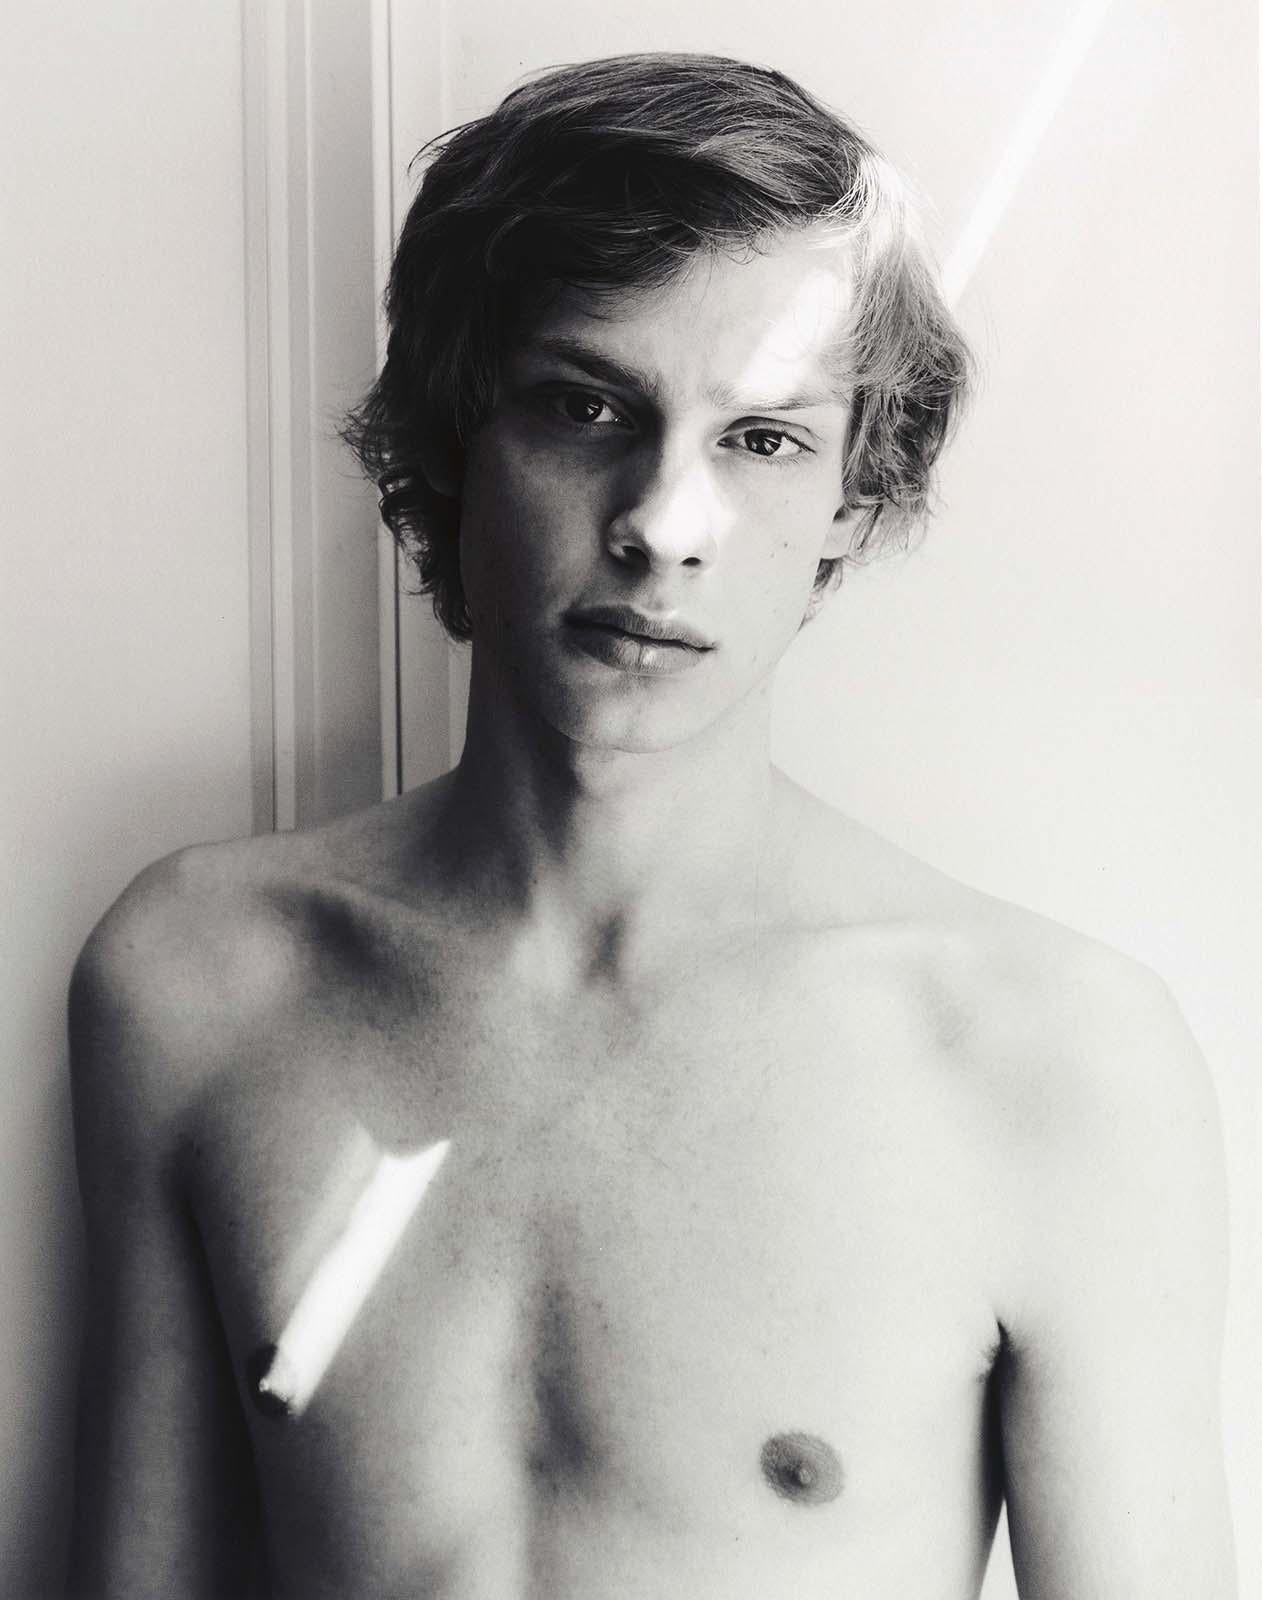 Alex Avgud Figurative Photograph – Jay and a Ray of Sun (the sun slants across young man's body from eye to nipple)